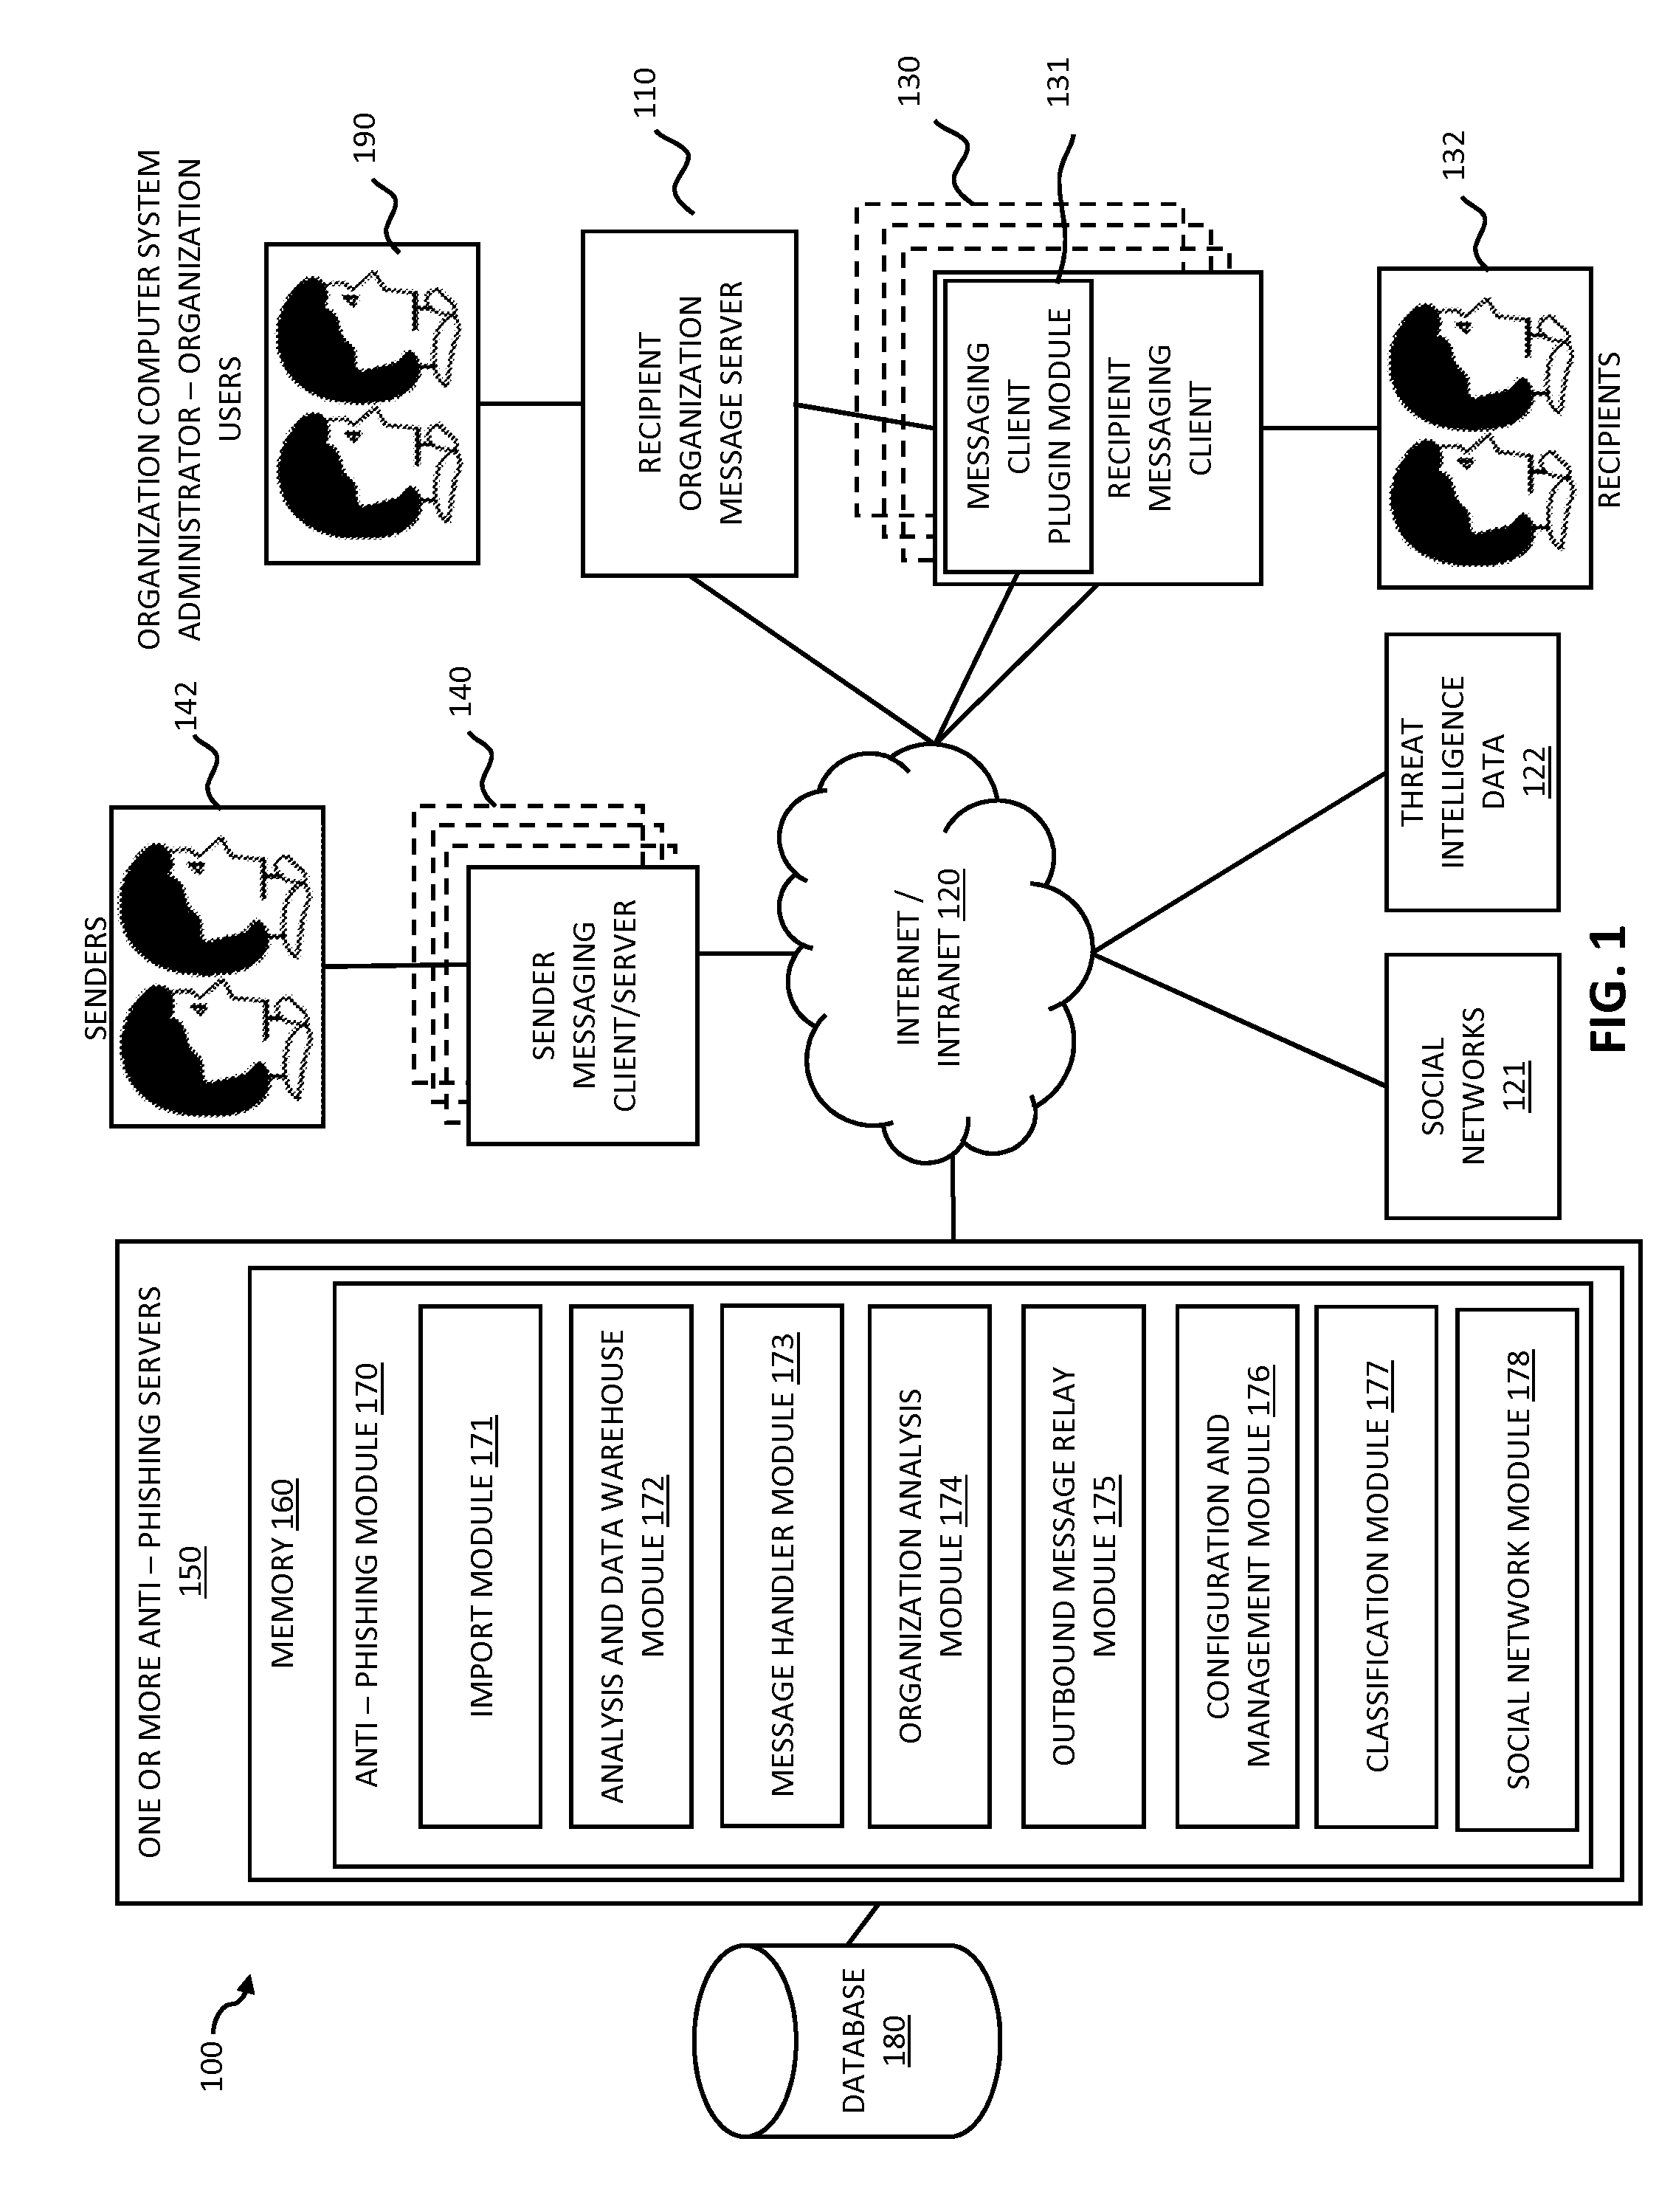 Systems and methods for electronic message analysis